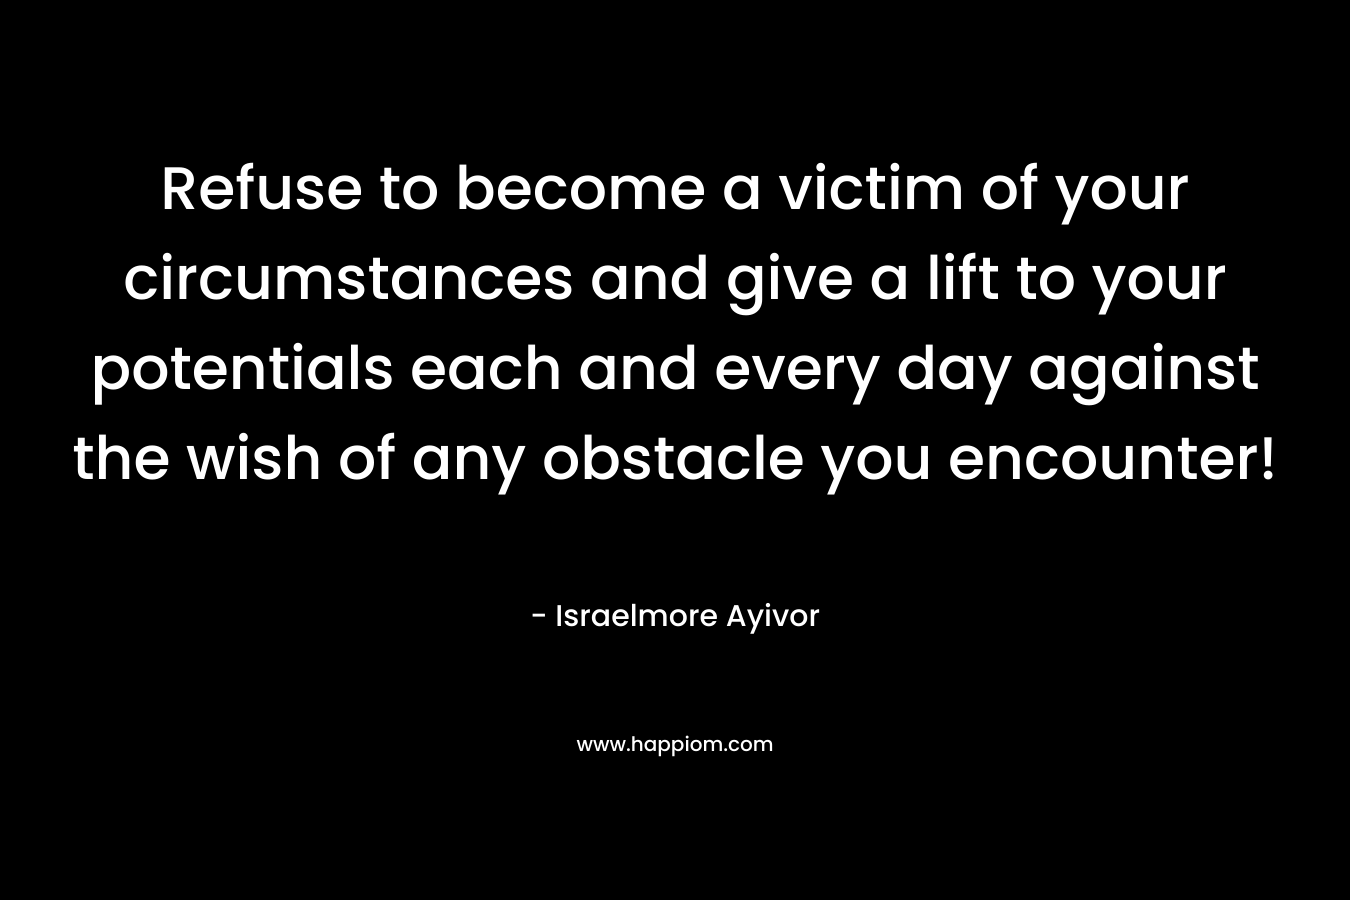 Refuse to become a victim of your circumstances and give a lift to your potentials each and every day against the wish of any obstacle you encounter!